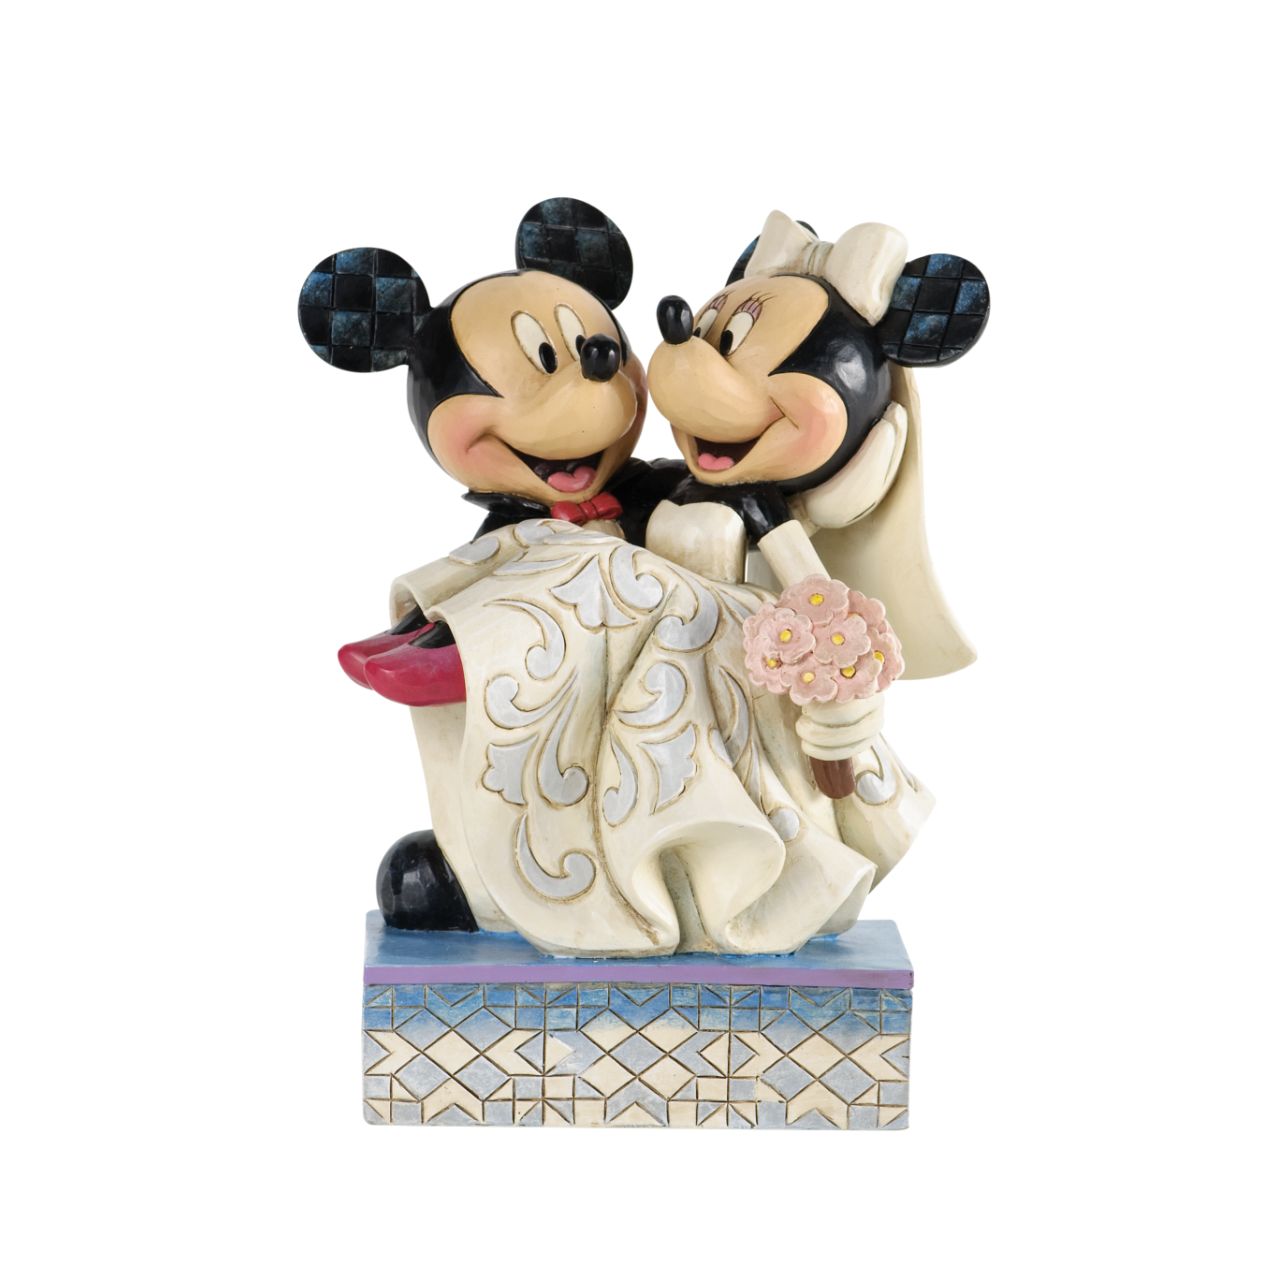 Jim Shore - Congratulations - Disney Mickey & Minnie Mouse Figurine  This Mickey and Minnie Wedding figurine is designed by award winning artist and sculptor, Jim Shore for the Disney Traditions brand. The figurine is made from cast stone.